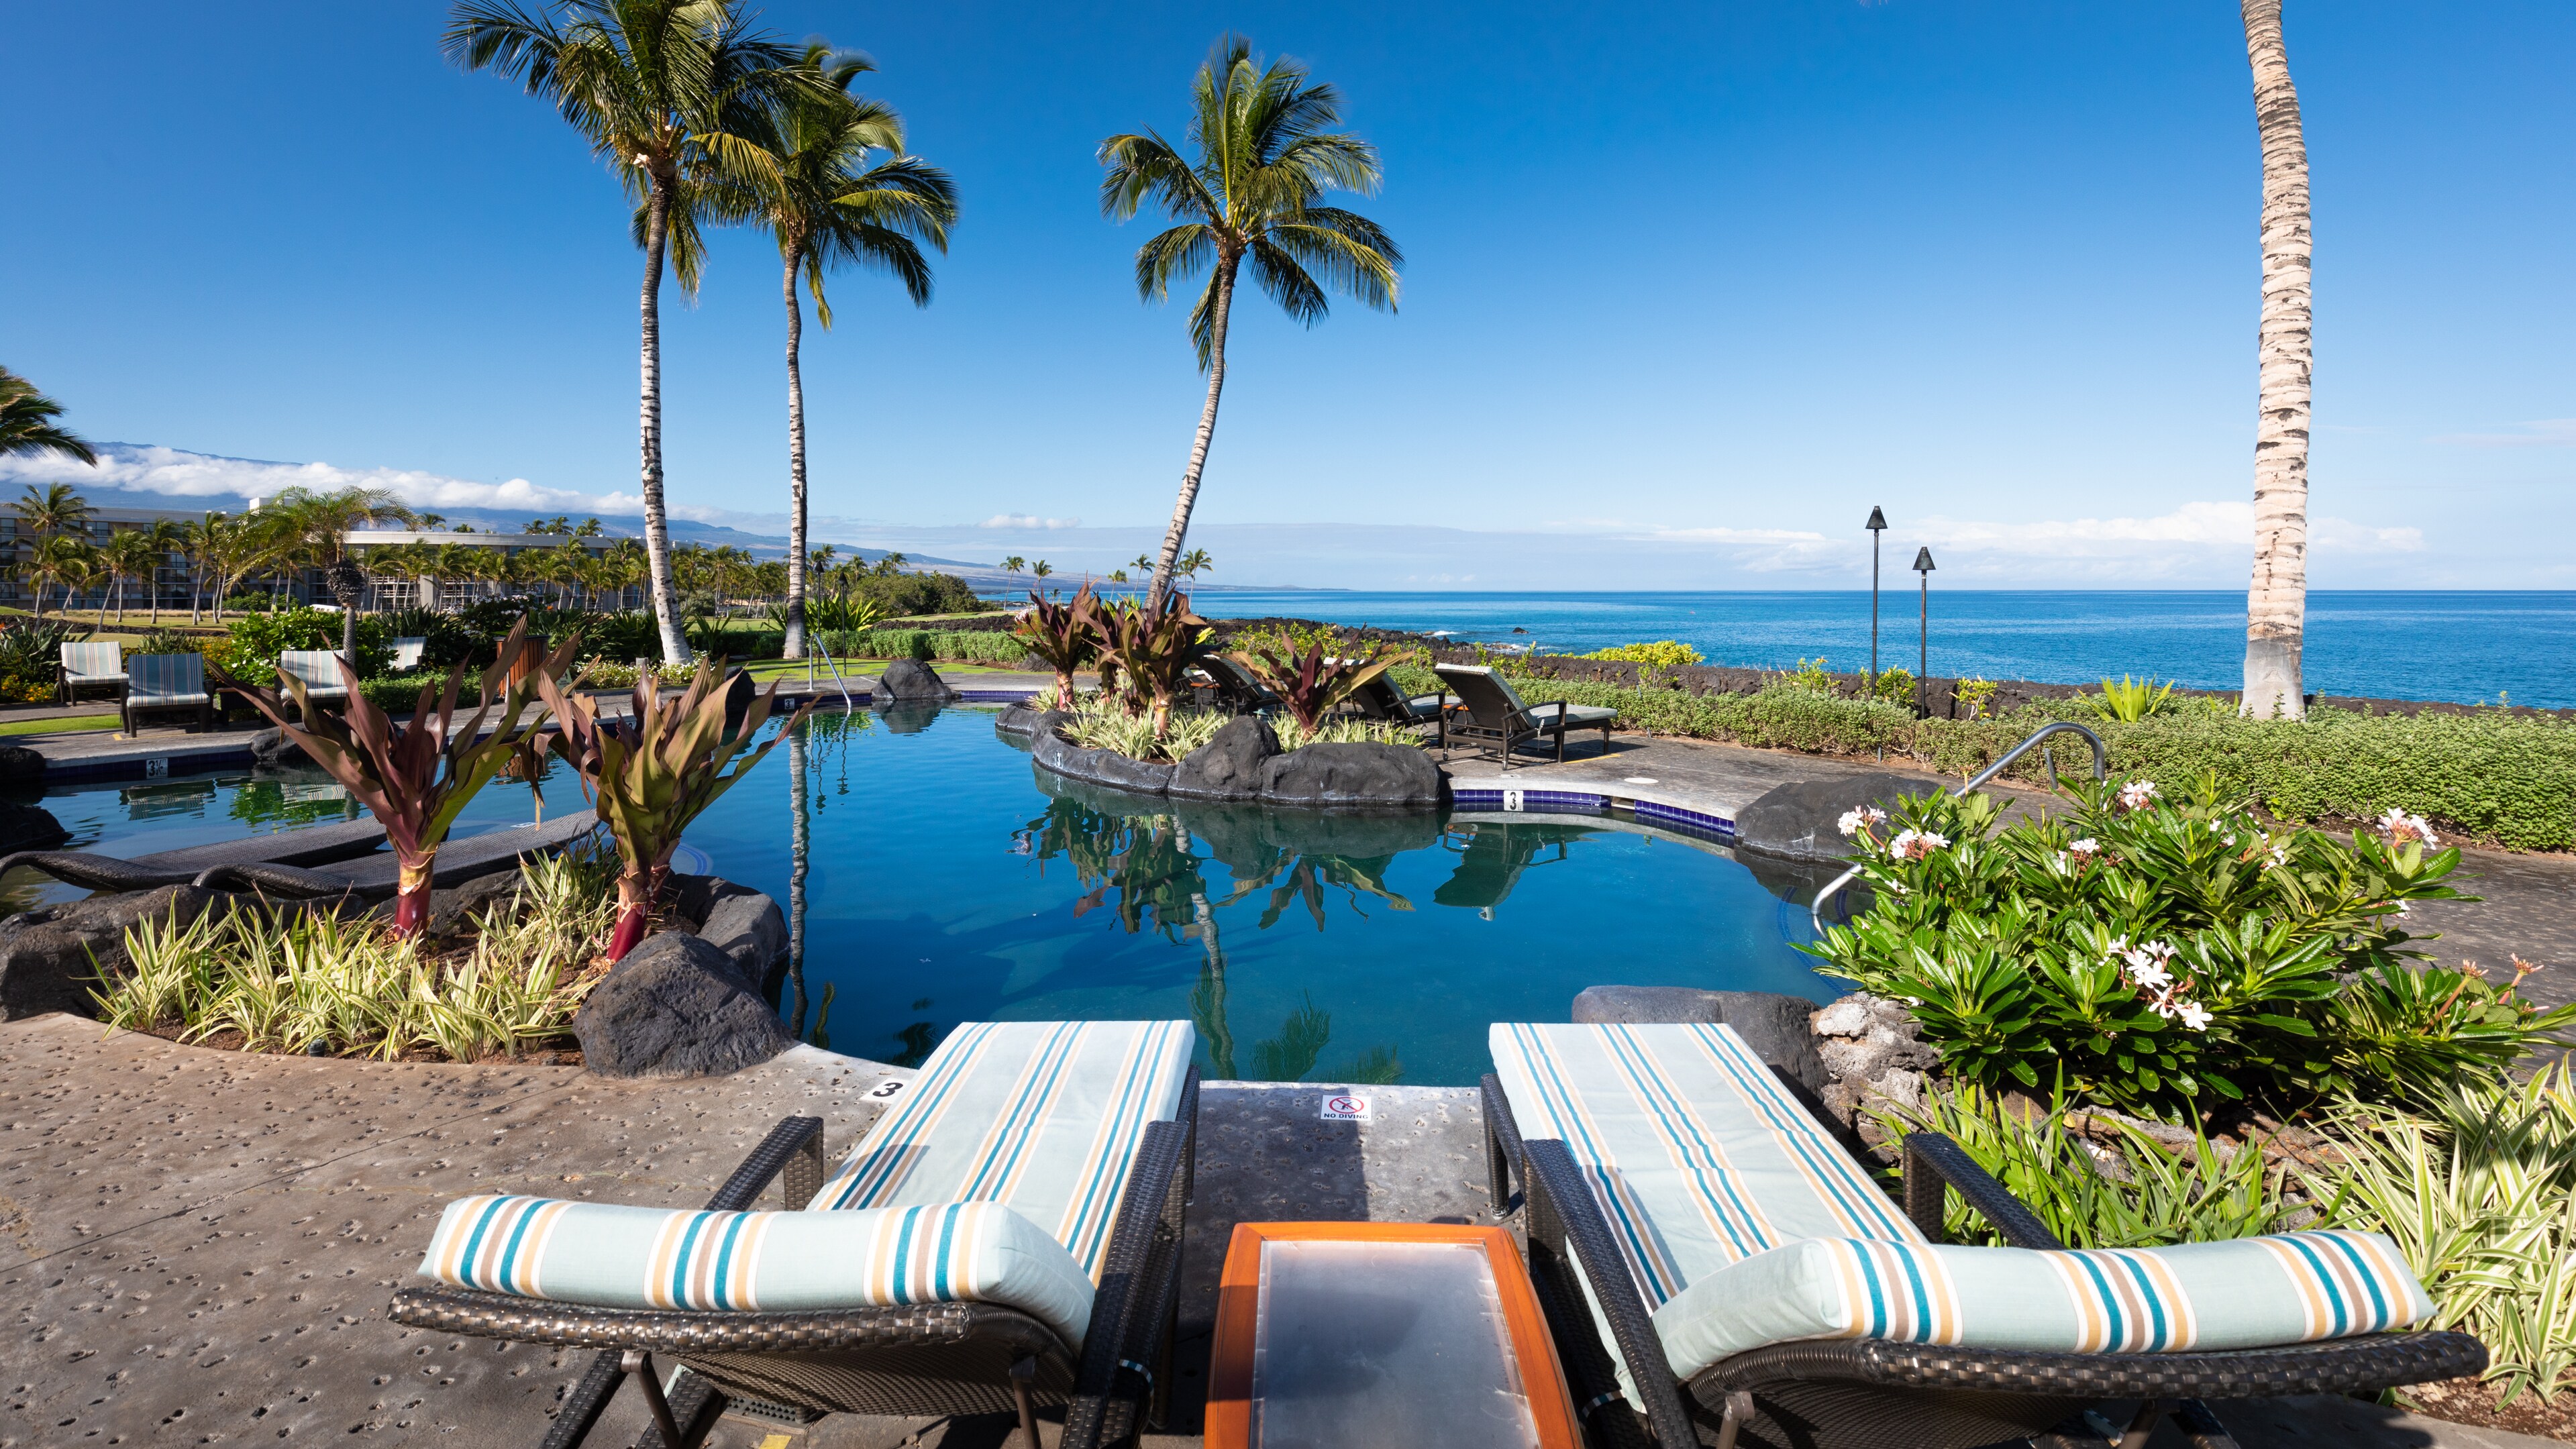 Hali'i Kai Ocean Club - one of the best pools on the island.   Direct ocean front.